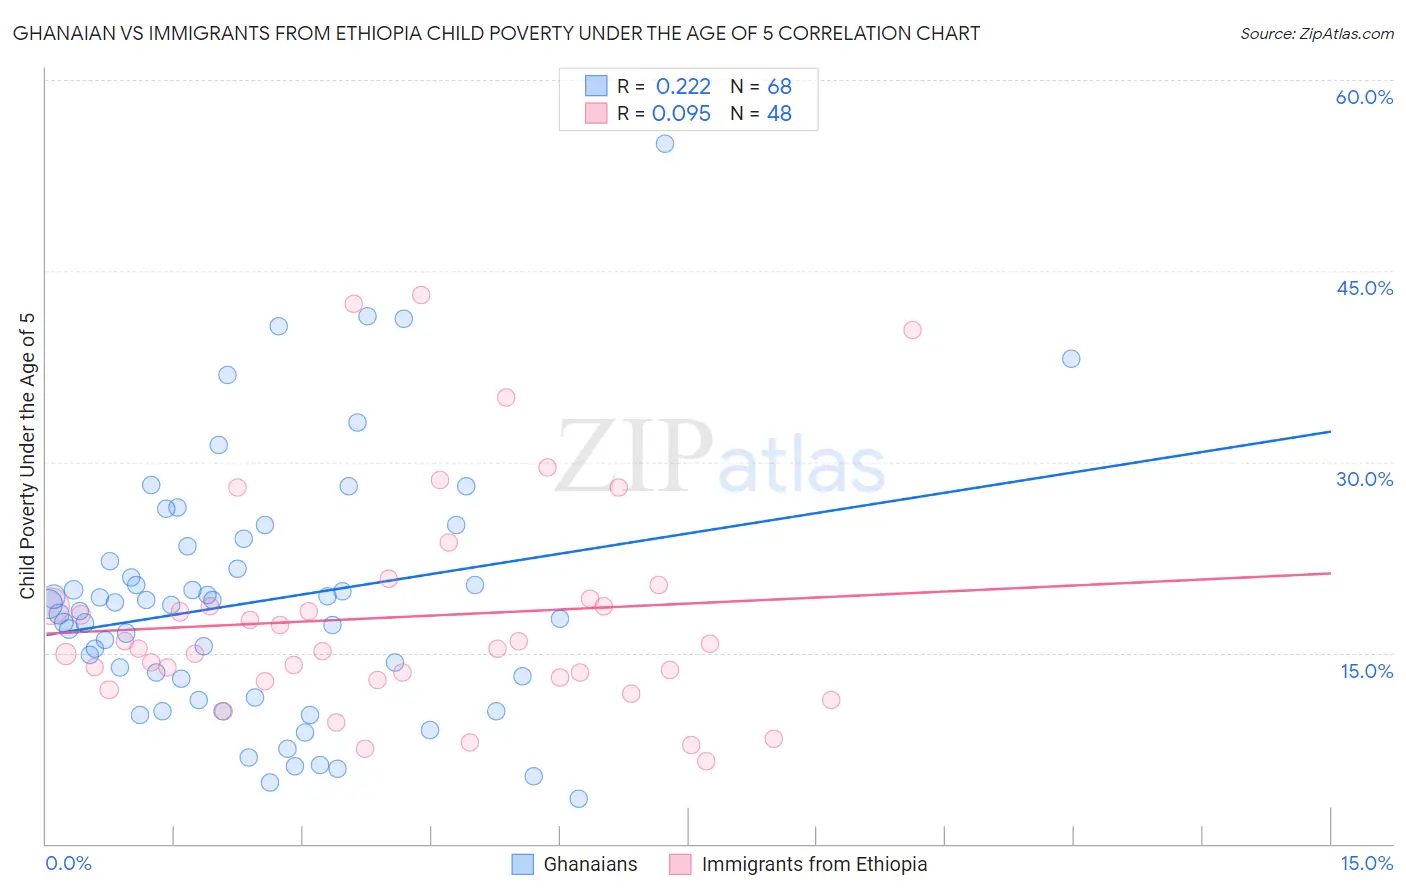 Ghanaian vs Immigrants from Ethiopia Child Poverty Under the Age of 5